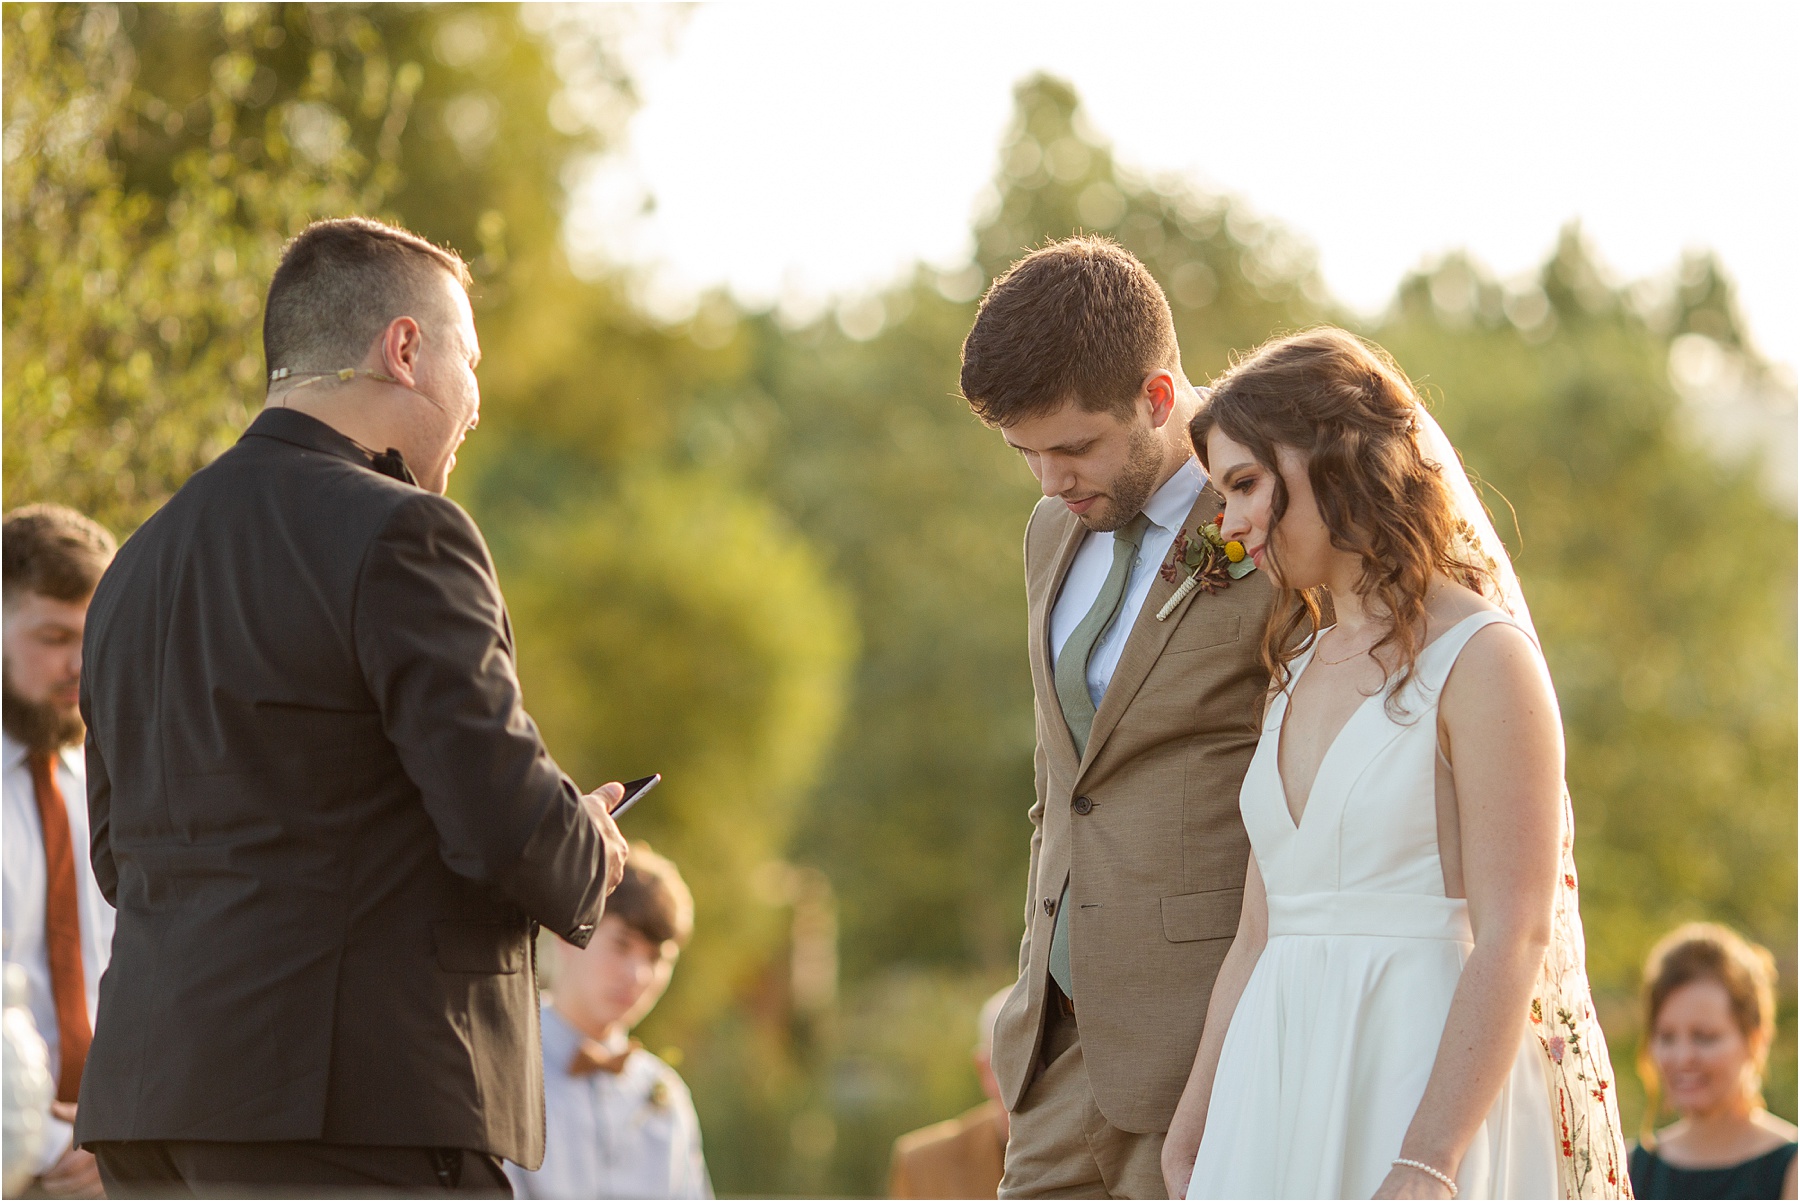 Pastor prays with bride and groom during the wedding in Greenville SC vineyard